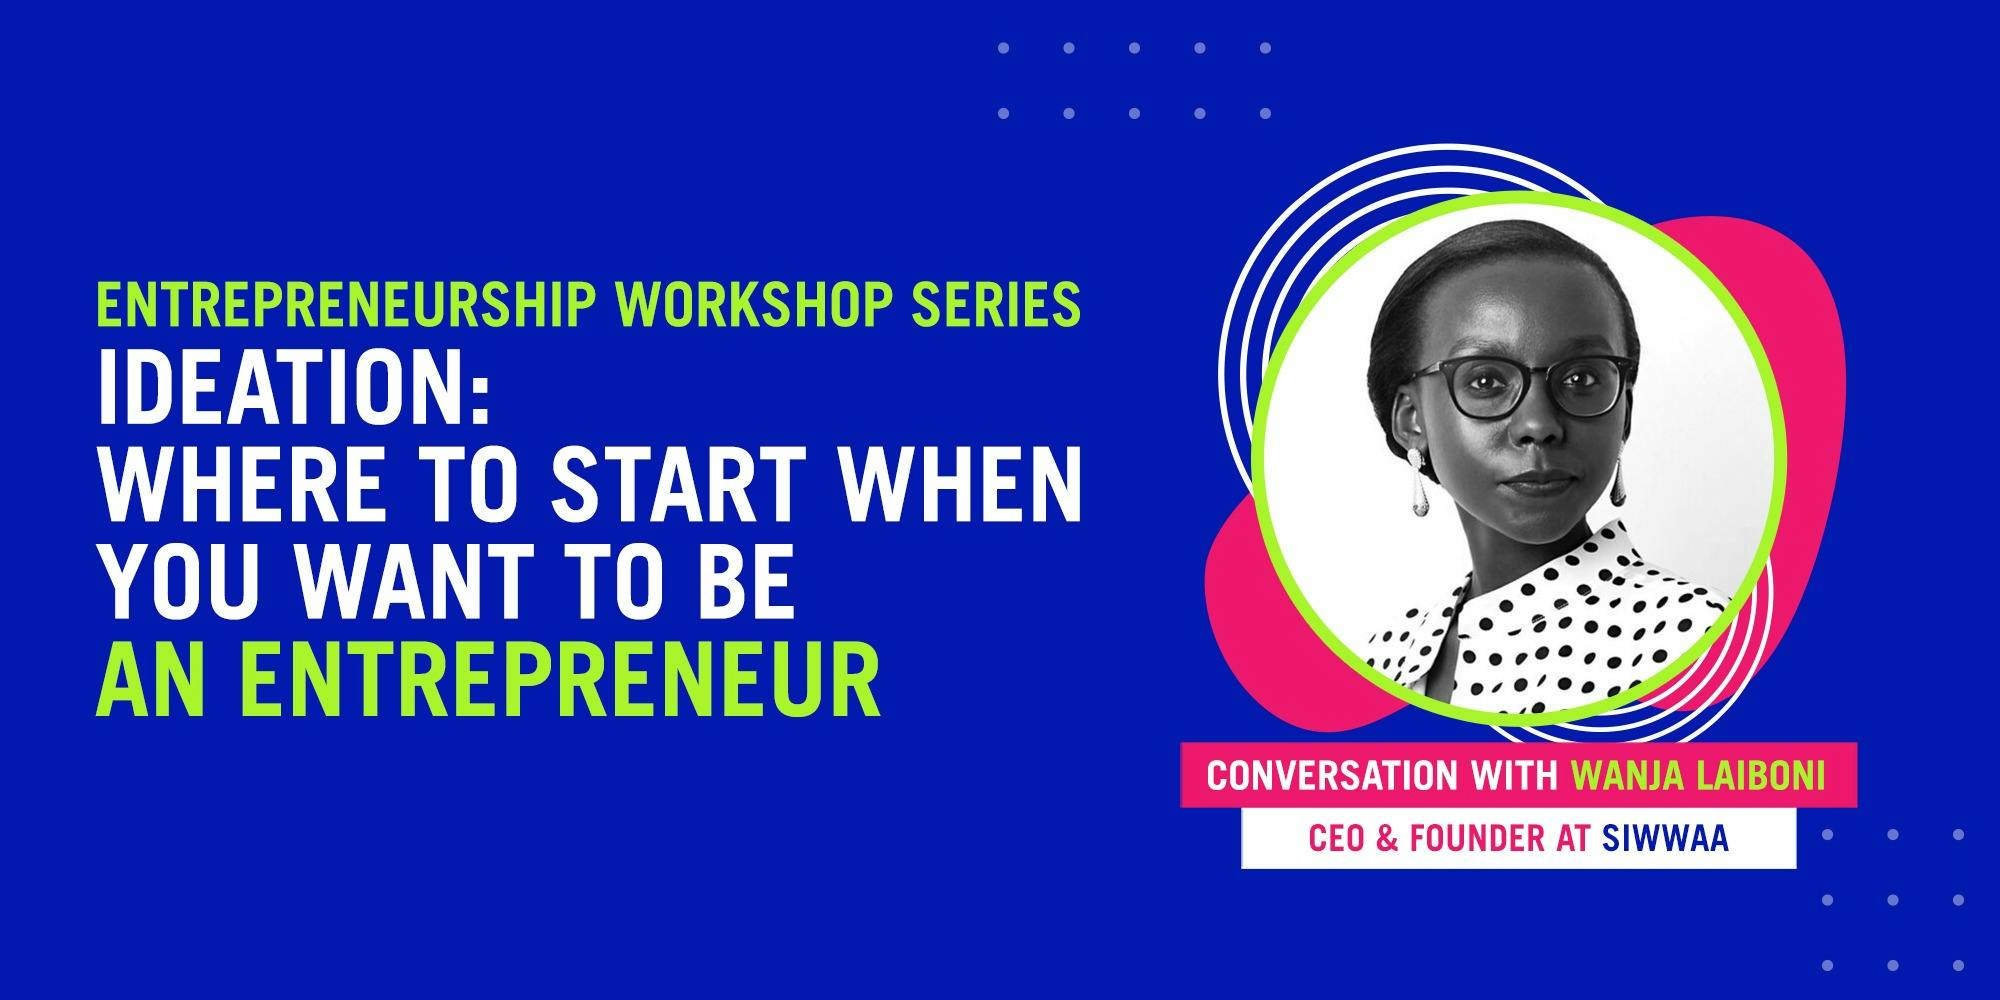 Entrepreneurship Workshop Series - Ideation: Where To Start When You Want To Be An Entrepreneur